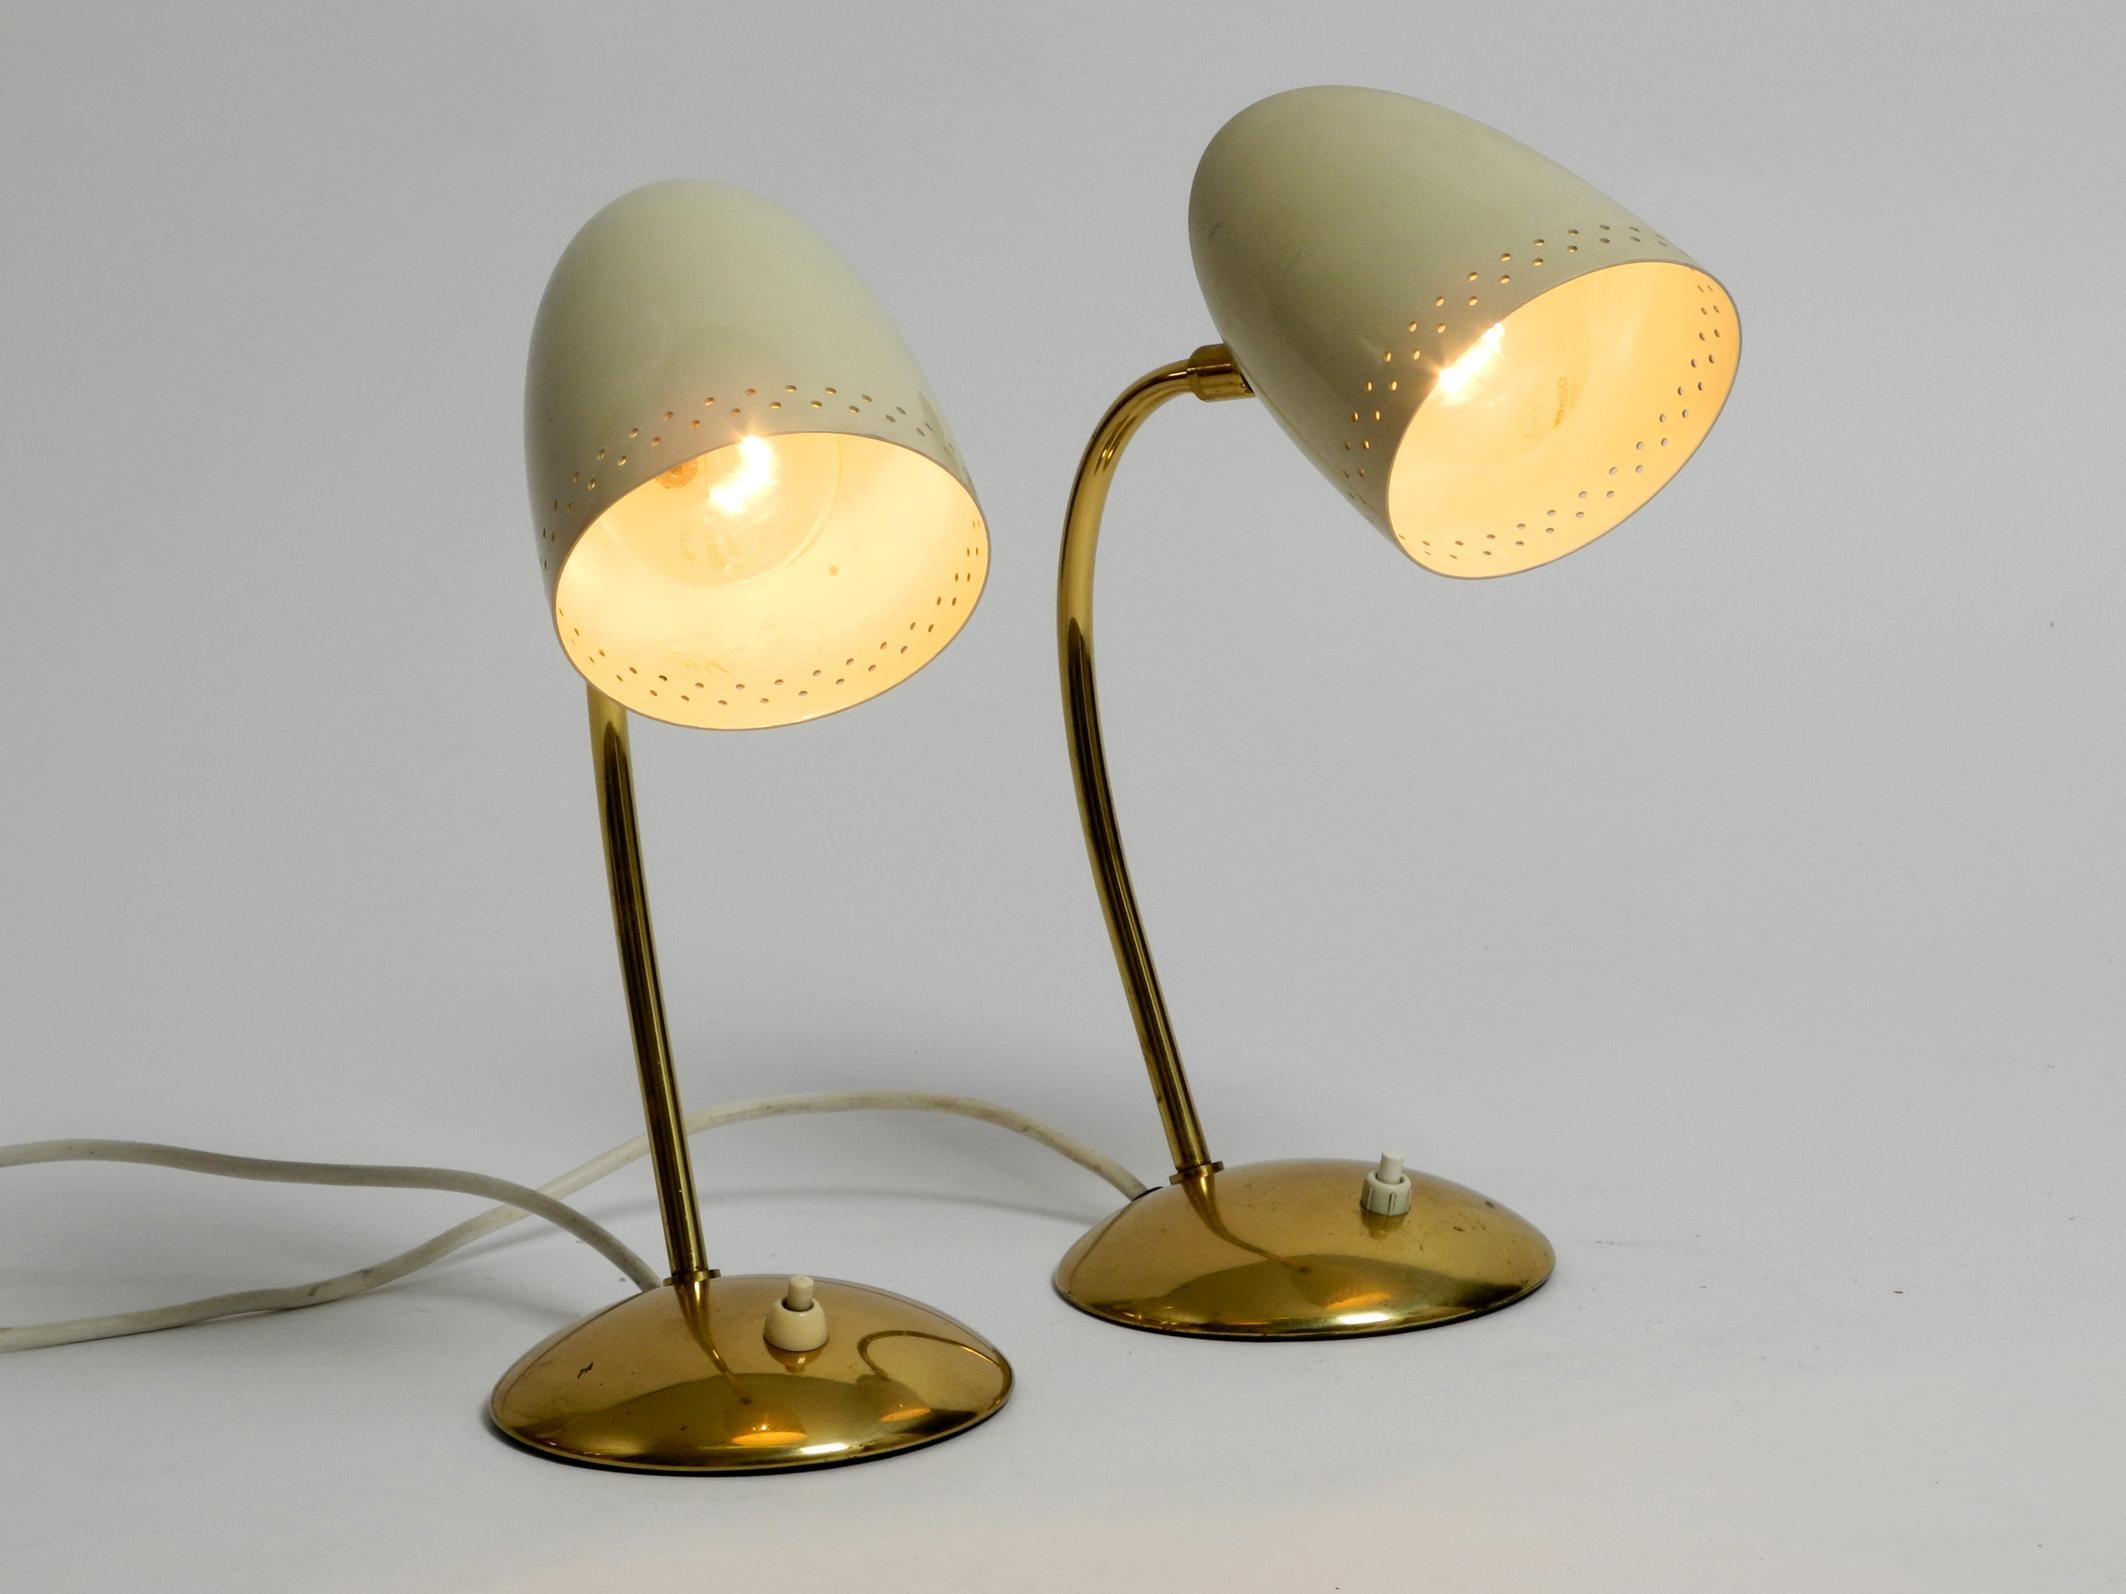 Pair of Beautiful German Mid-Century Modern Brass Table Lamps with Metal Shades For Sale 1